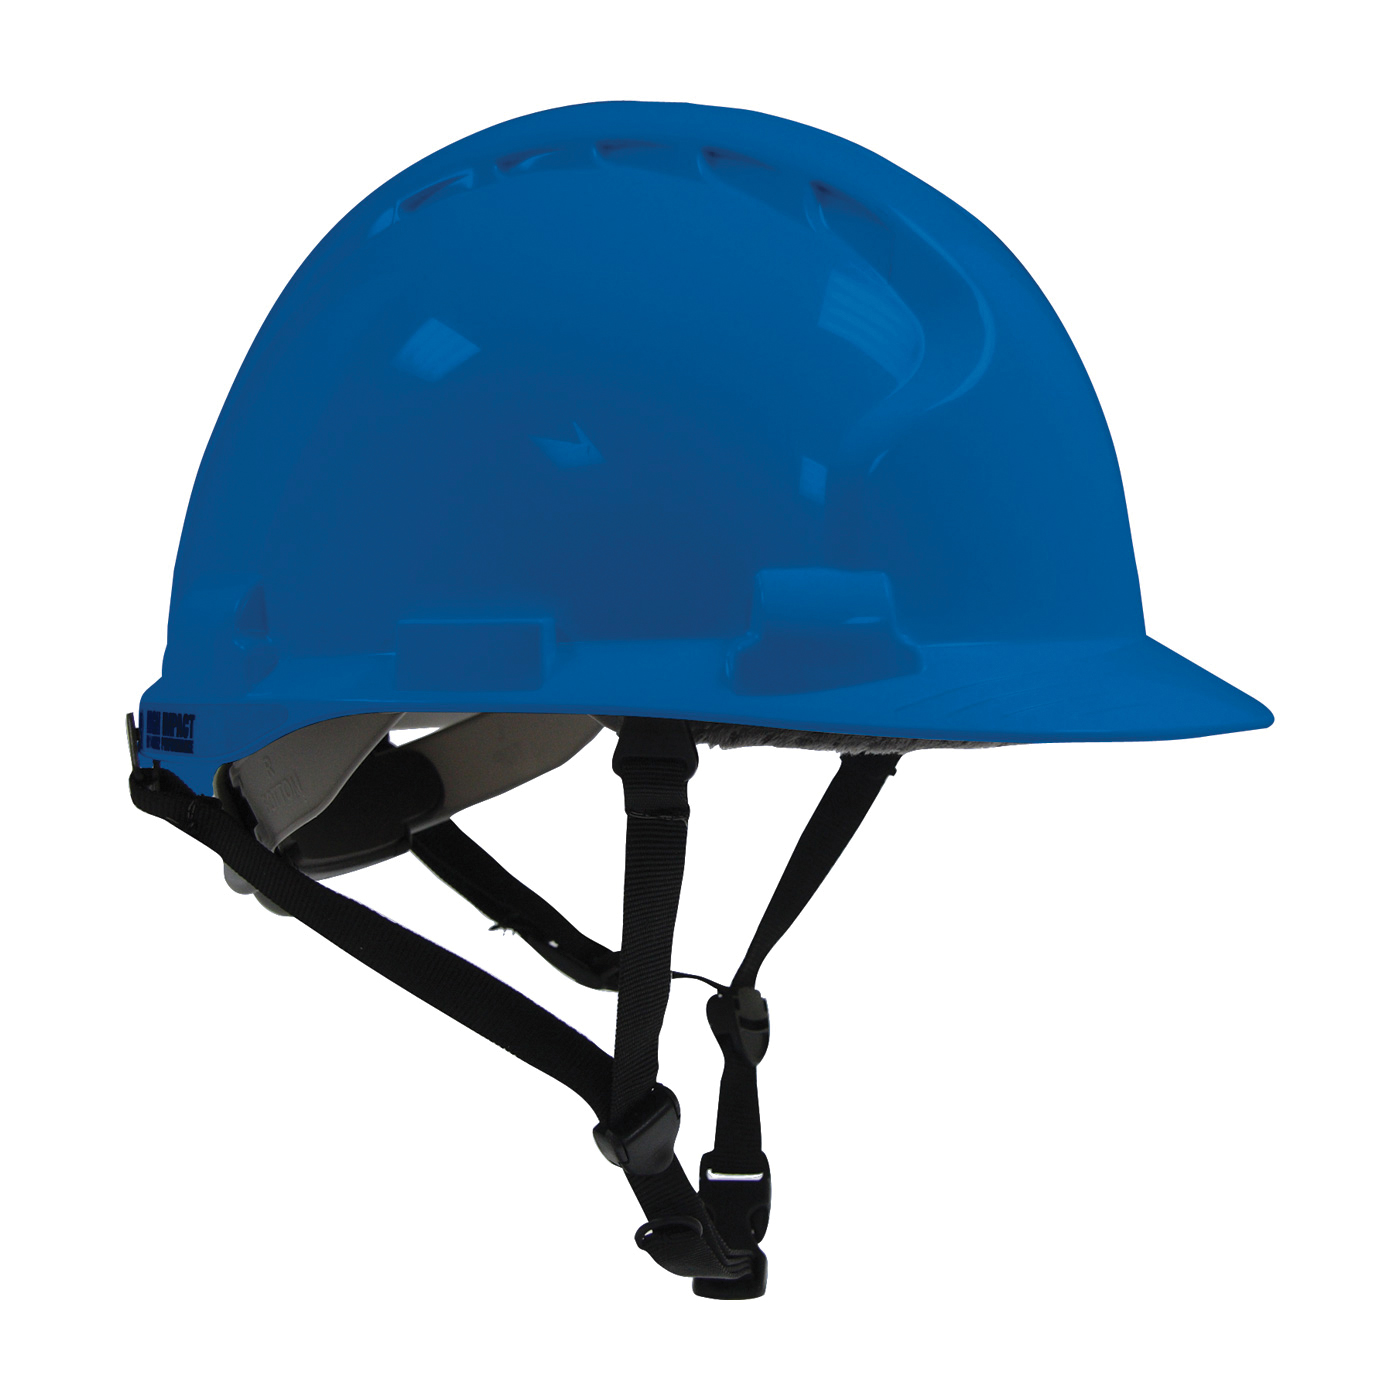 PIP® MK8 Evolution® 280-AHS240-50 Cap Style Non-Vented Standard Brim Hard Hat, SZ 6-5/8 Fits Mini Hat, SZ 8 Fits Max Hat, HDPE Shell/EPS Impact Liner, Deluxe Polyester Suspension, ANSI Electrical Class Rating: Class E, Wheel Ratchet Adjustment